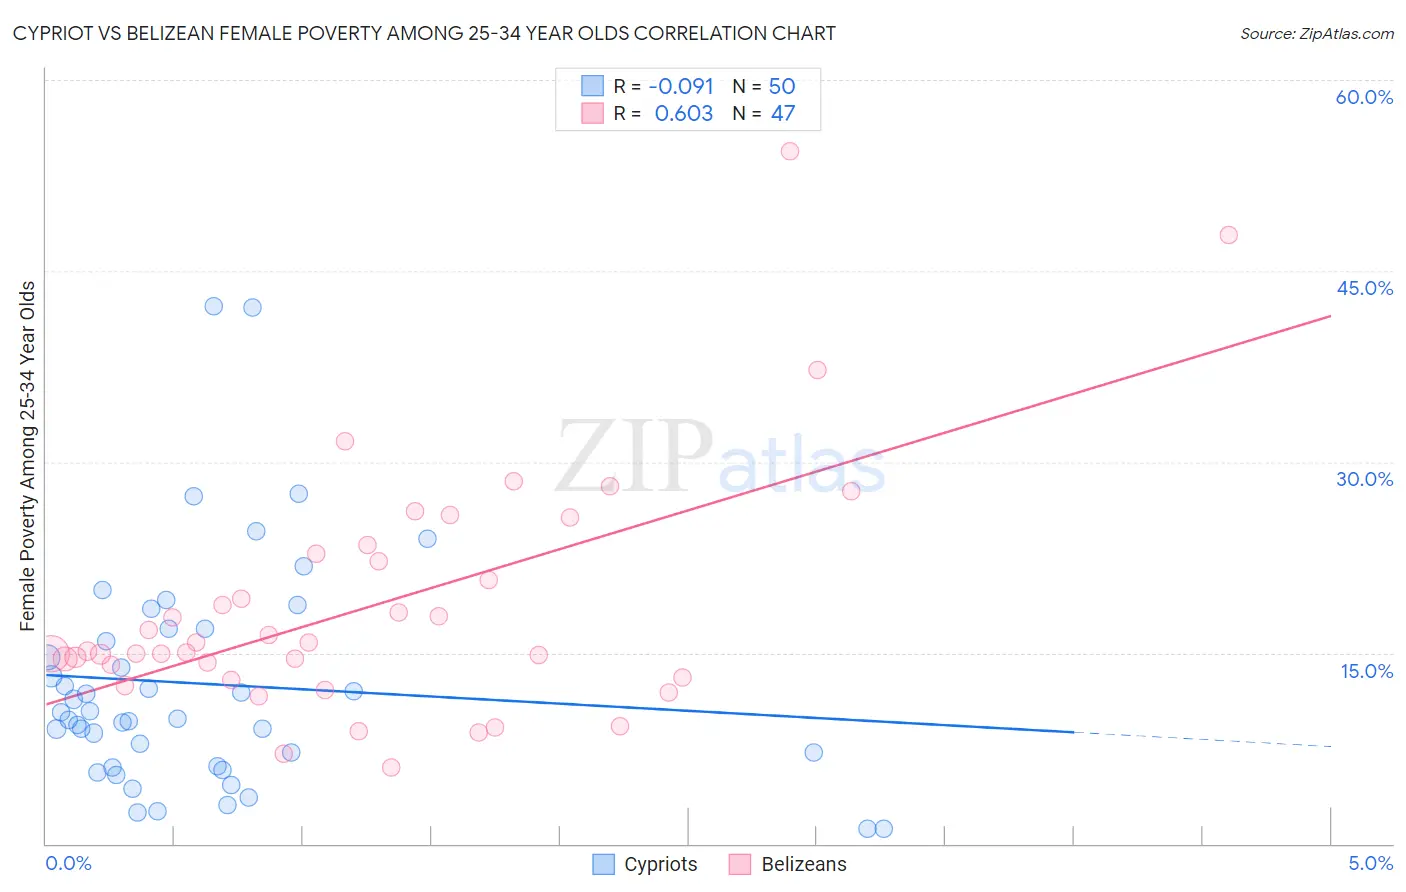 Cypriot vs Belizean Female Poverty Among 25-34 Year Olds